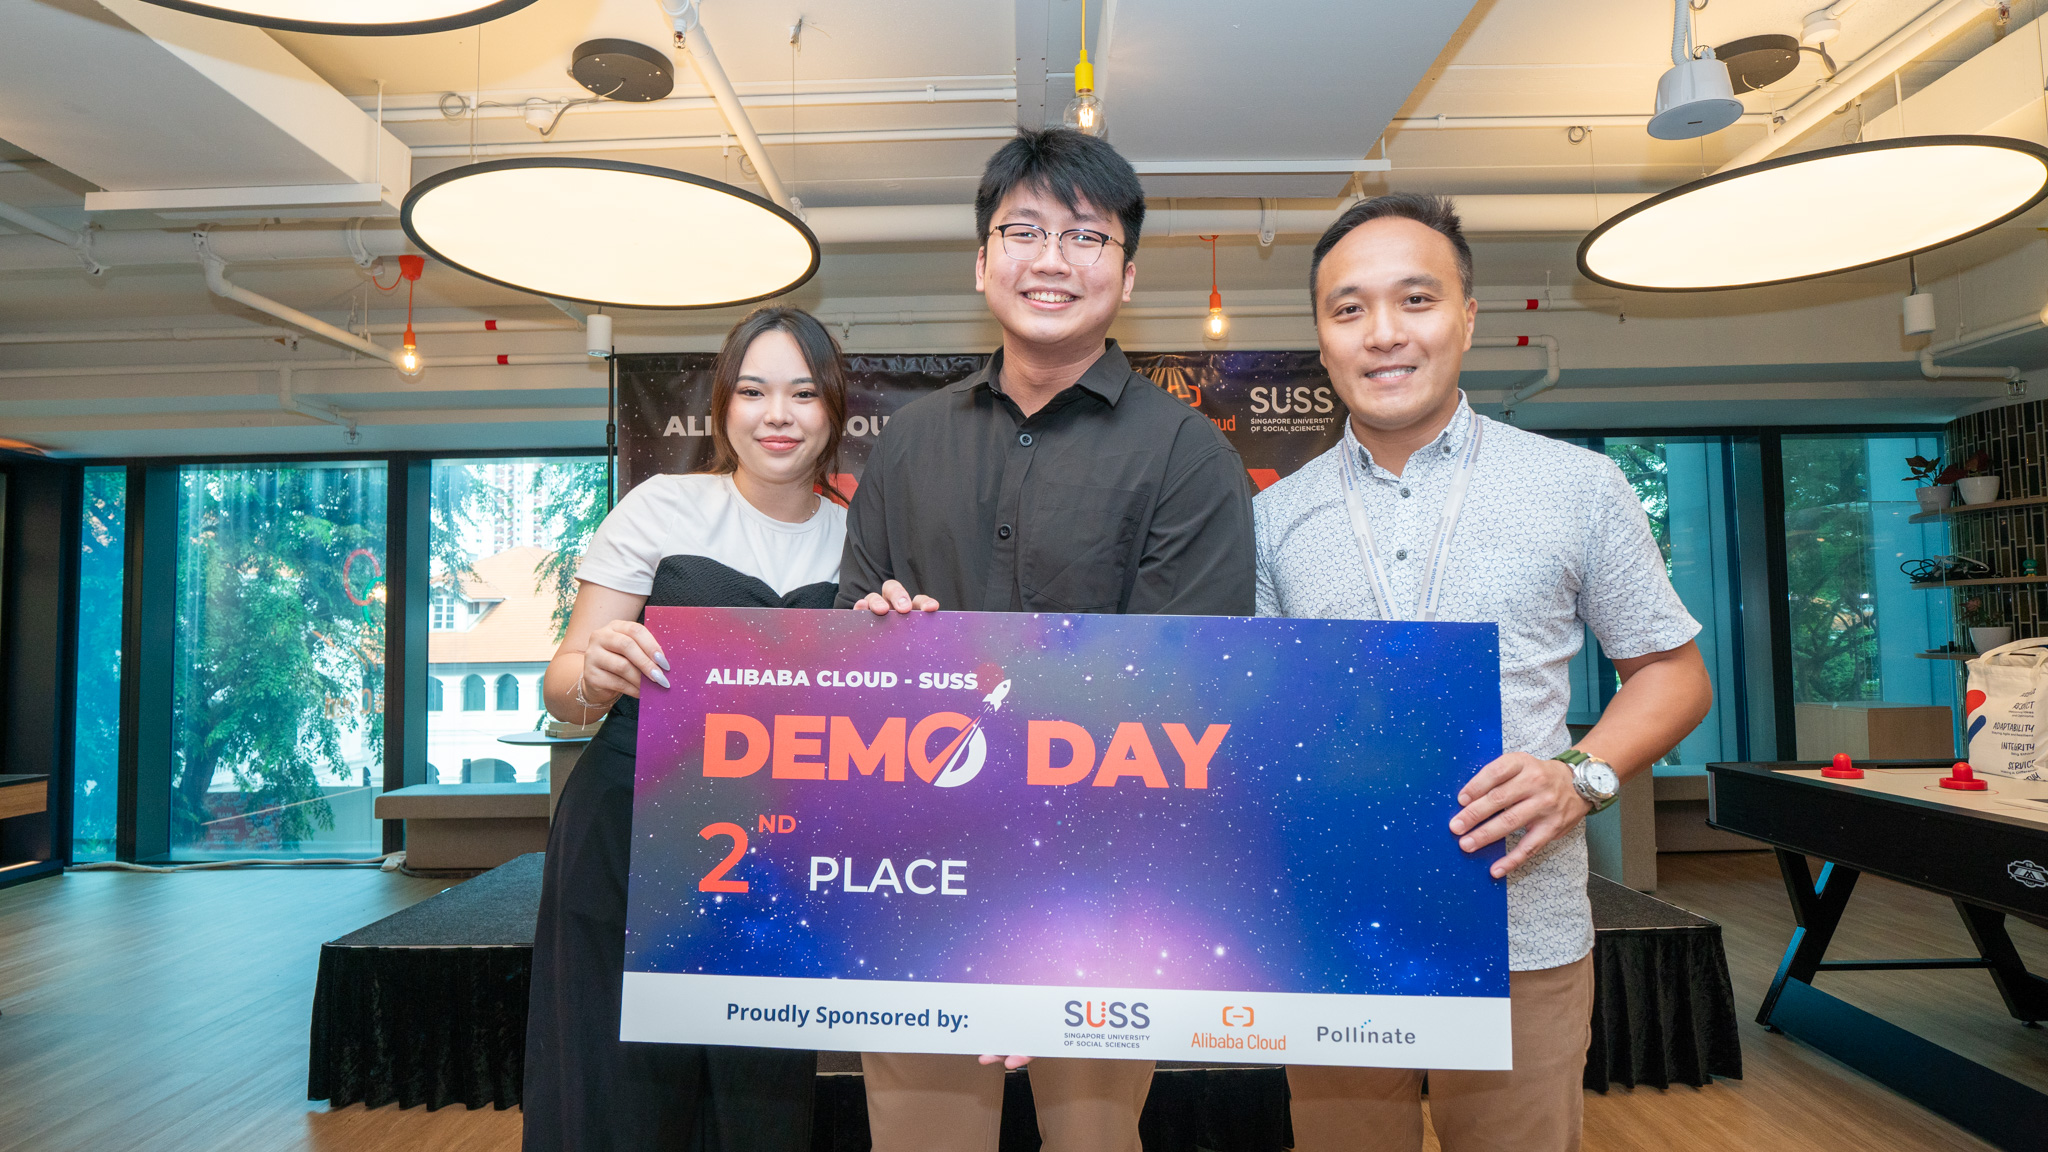 First runner-up of Alibaba Cloud-SUSS Demo Day, Surety, graciously accepts their prize alongside Chris Tan, Director of Sales and Business Development at Alibaba Cloud, radiating pride and excitement